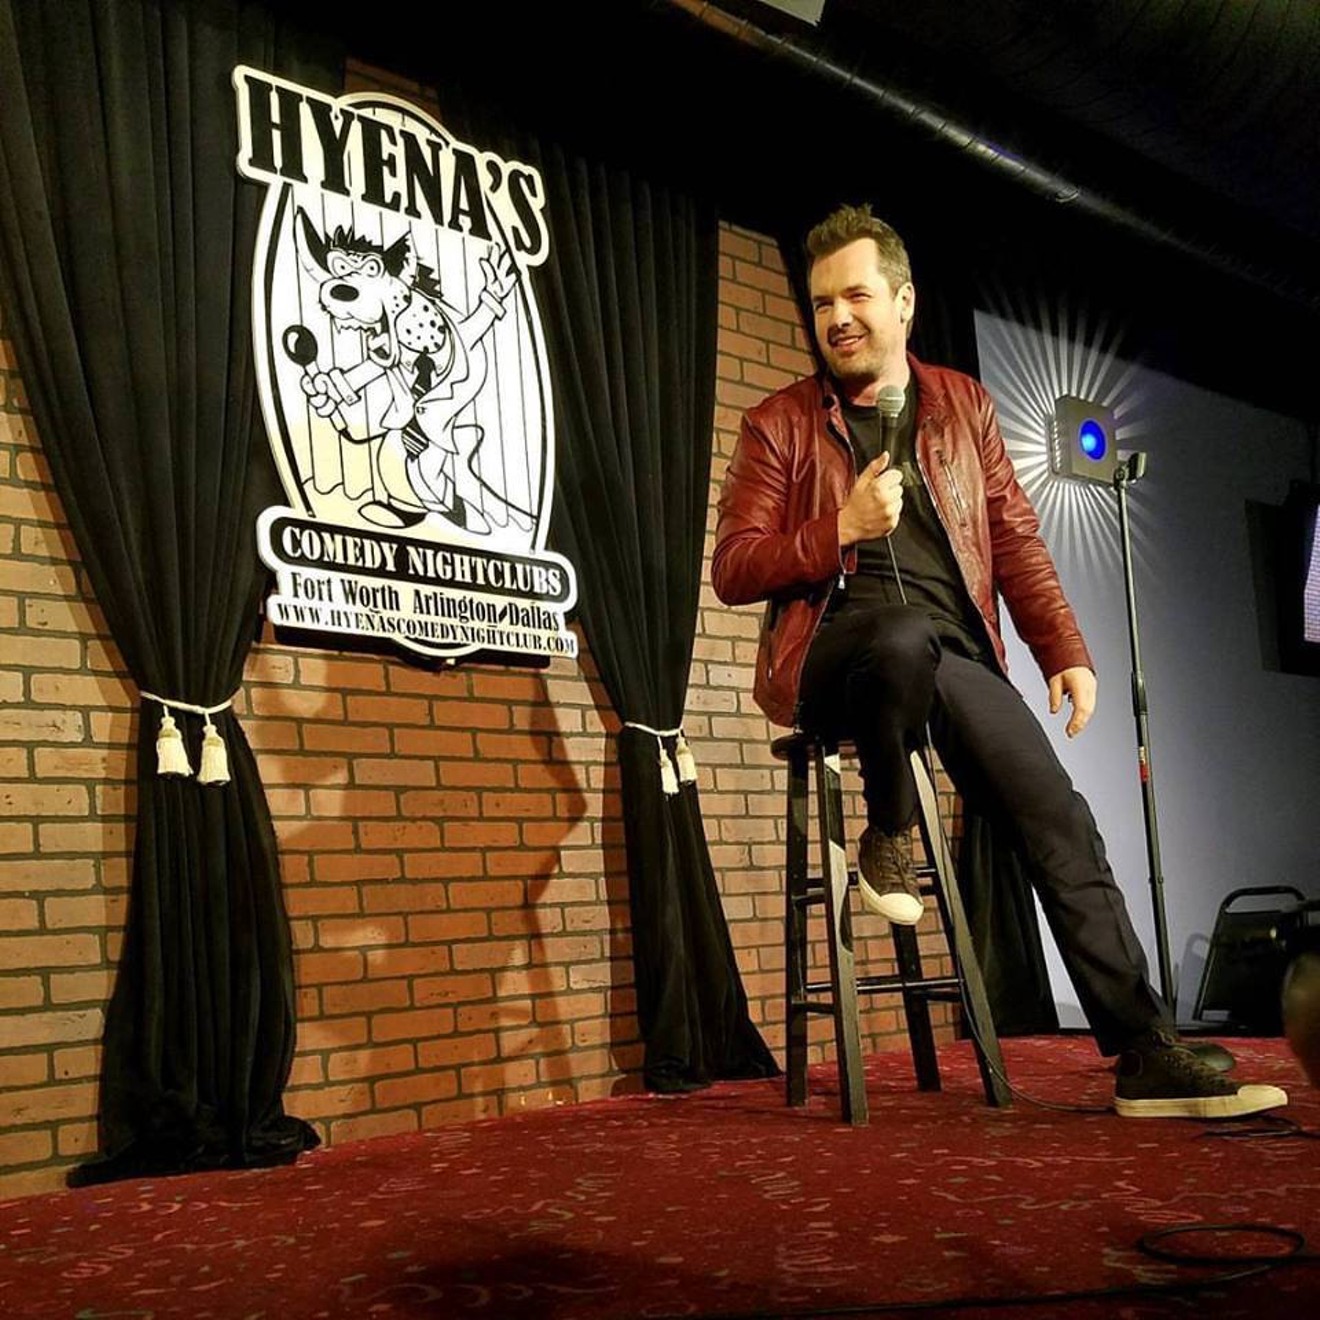 Comedian Jim Jefferies performed an unannounced 20-minute set at Hyena's Comedy Nightclub in Dallas last month while he was in town filming a segment for Comedy Central's The Jim Jefferies Show.